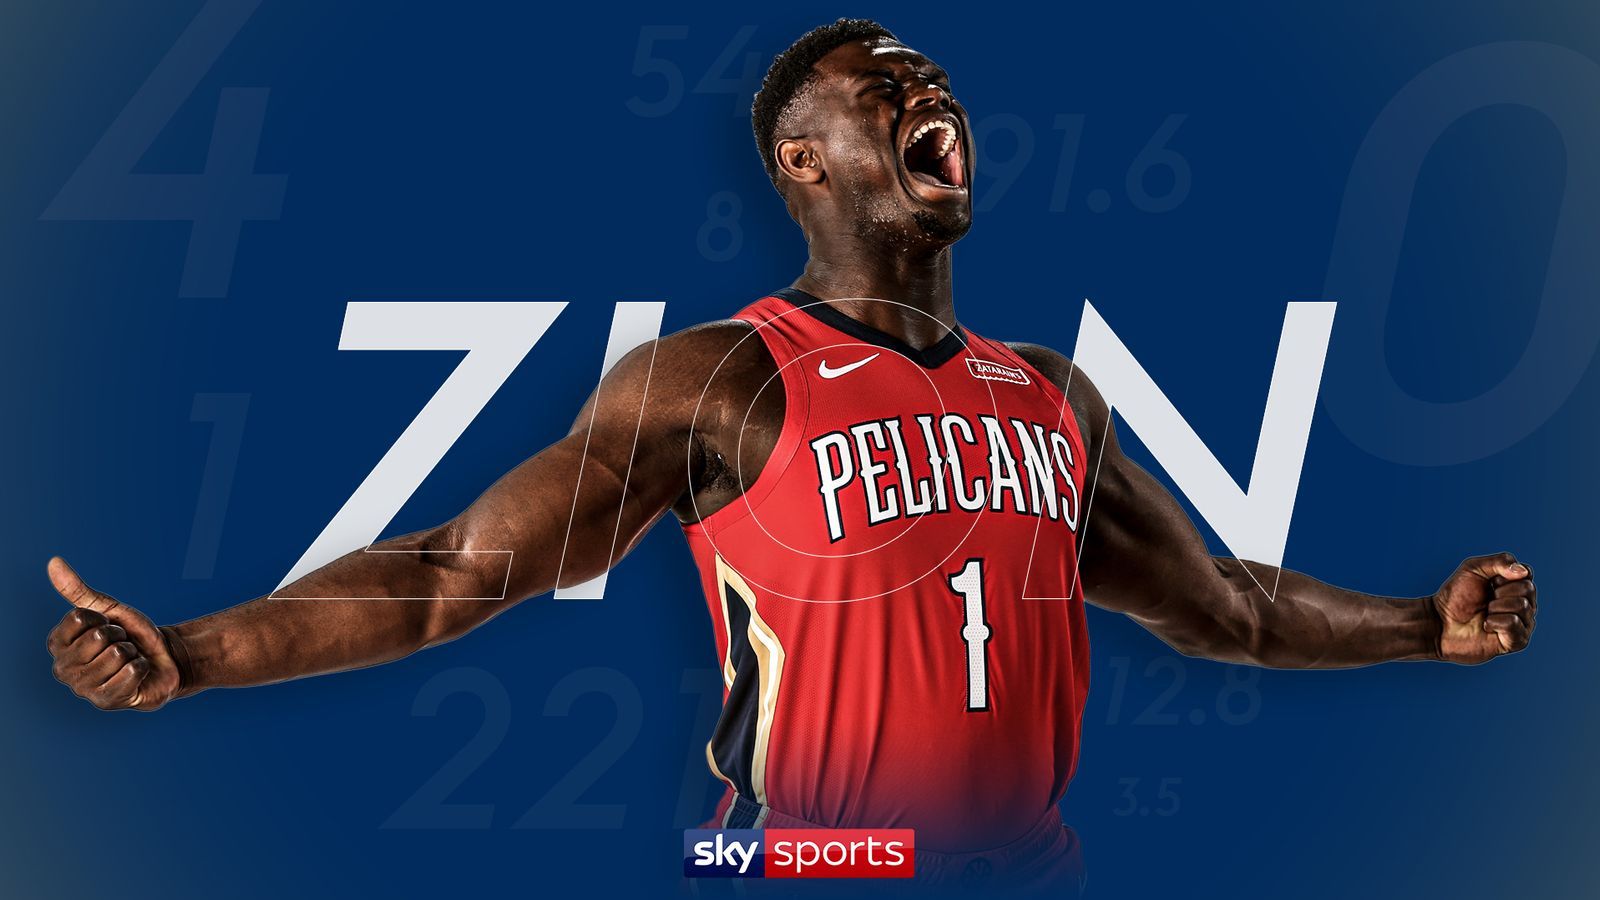 Zion Williamson lives up to hype in his first 10 New Orleans Pelicans games